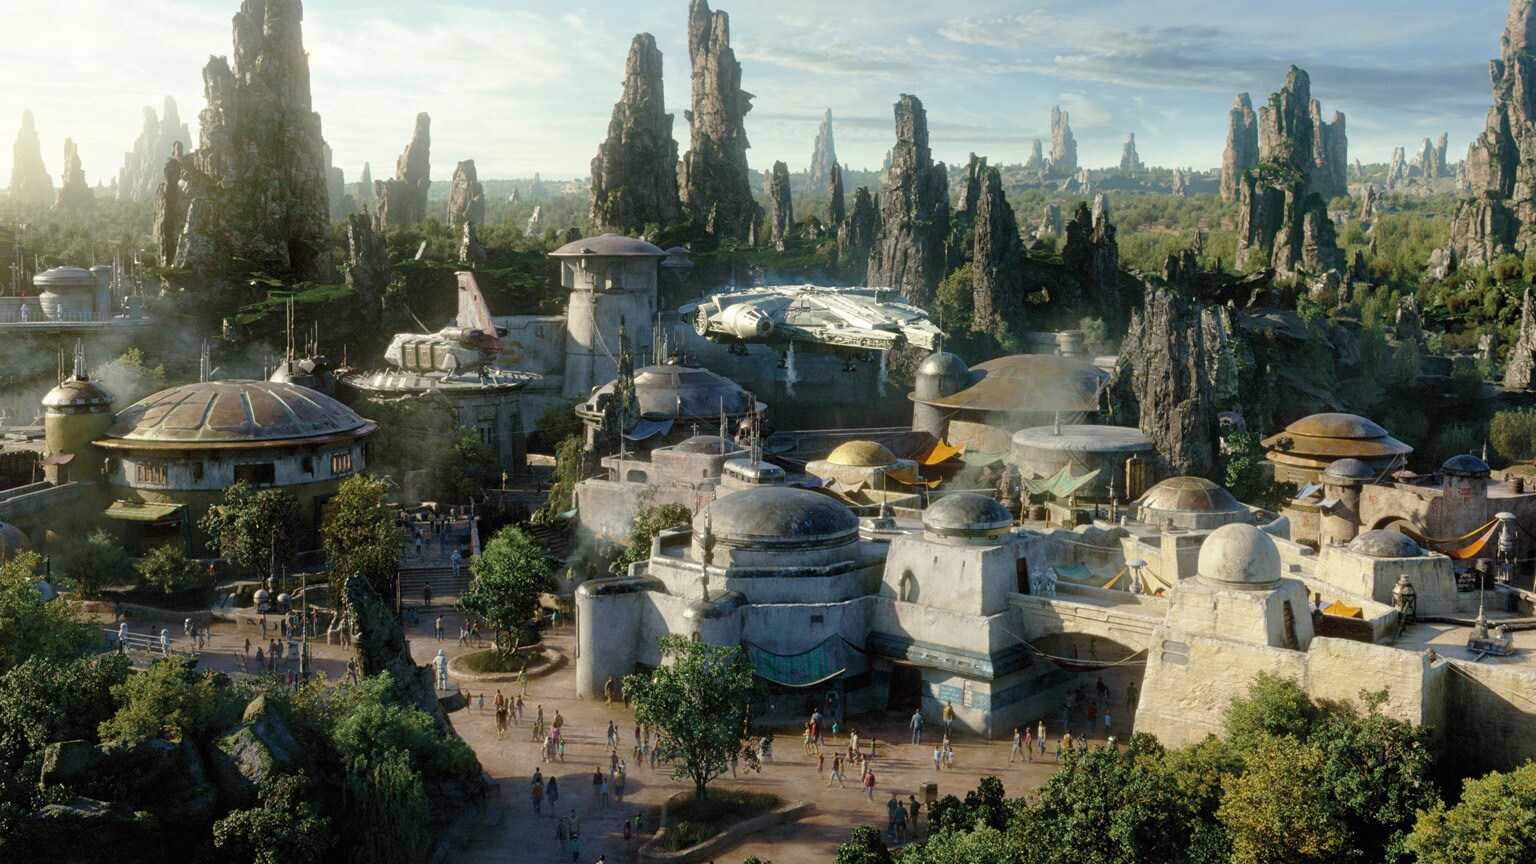 SWCC 2019: 6 Things We Learned from the Star Wars: Galaxy’s Edge Panel